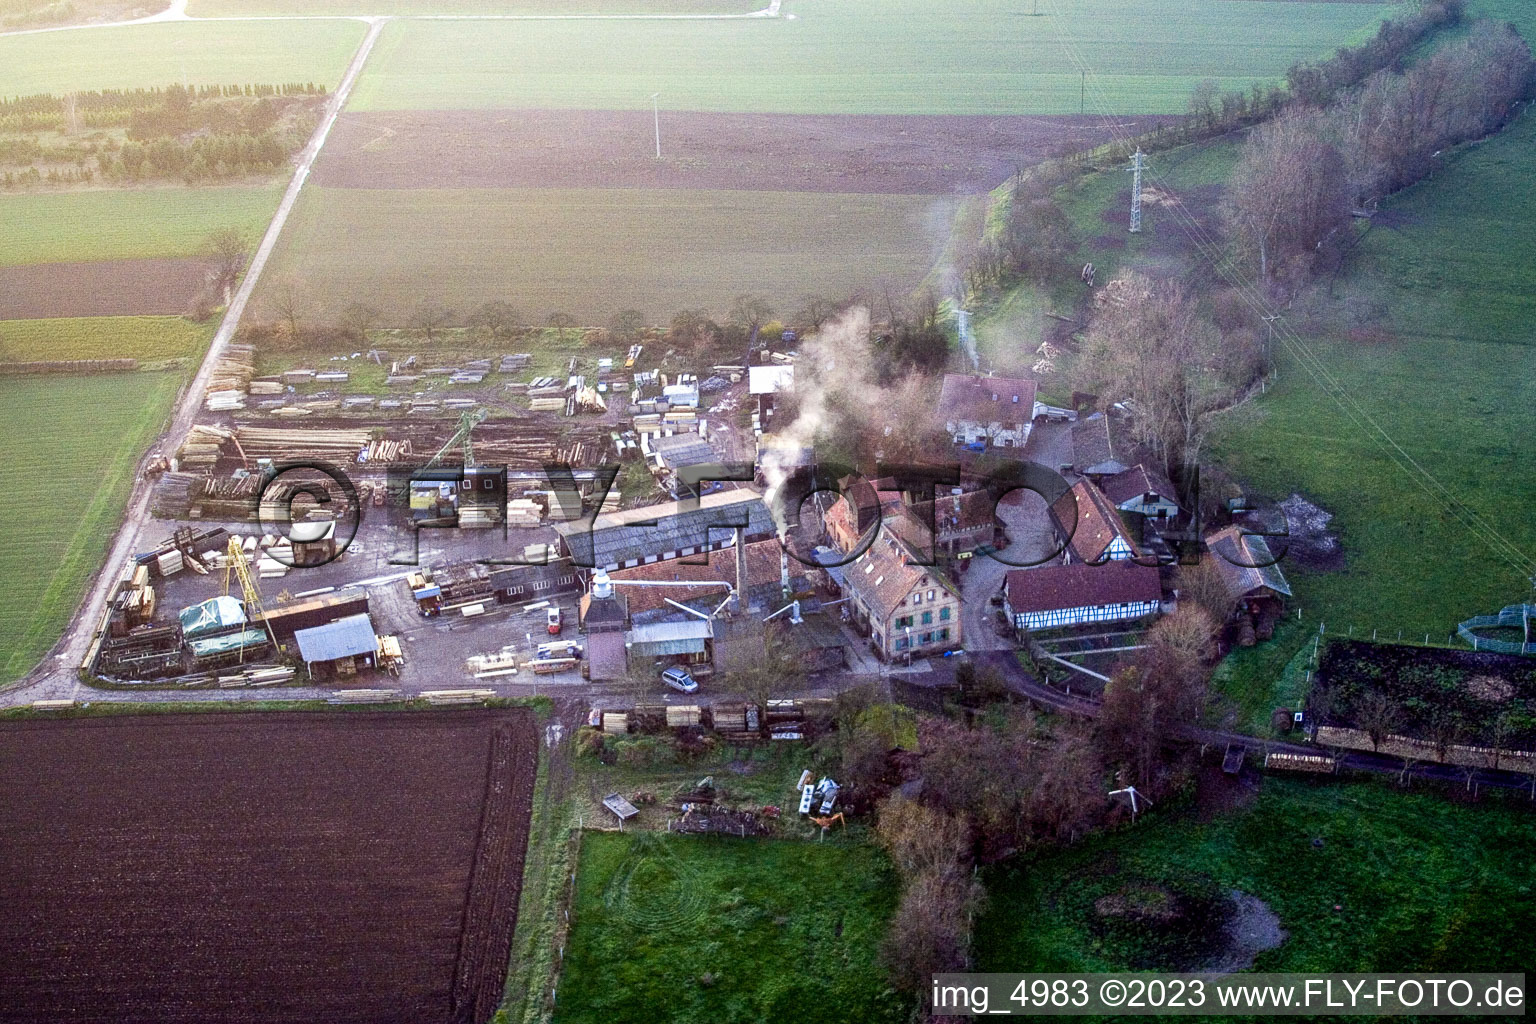 Schaidter mill in the district Schaidt in Wörth am Rhein in the state Rhineland-Palatinate, Germany from a drone